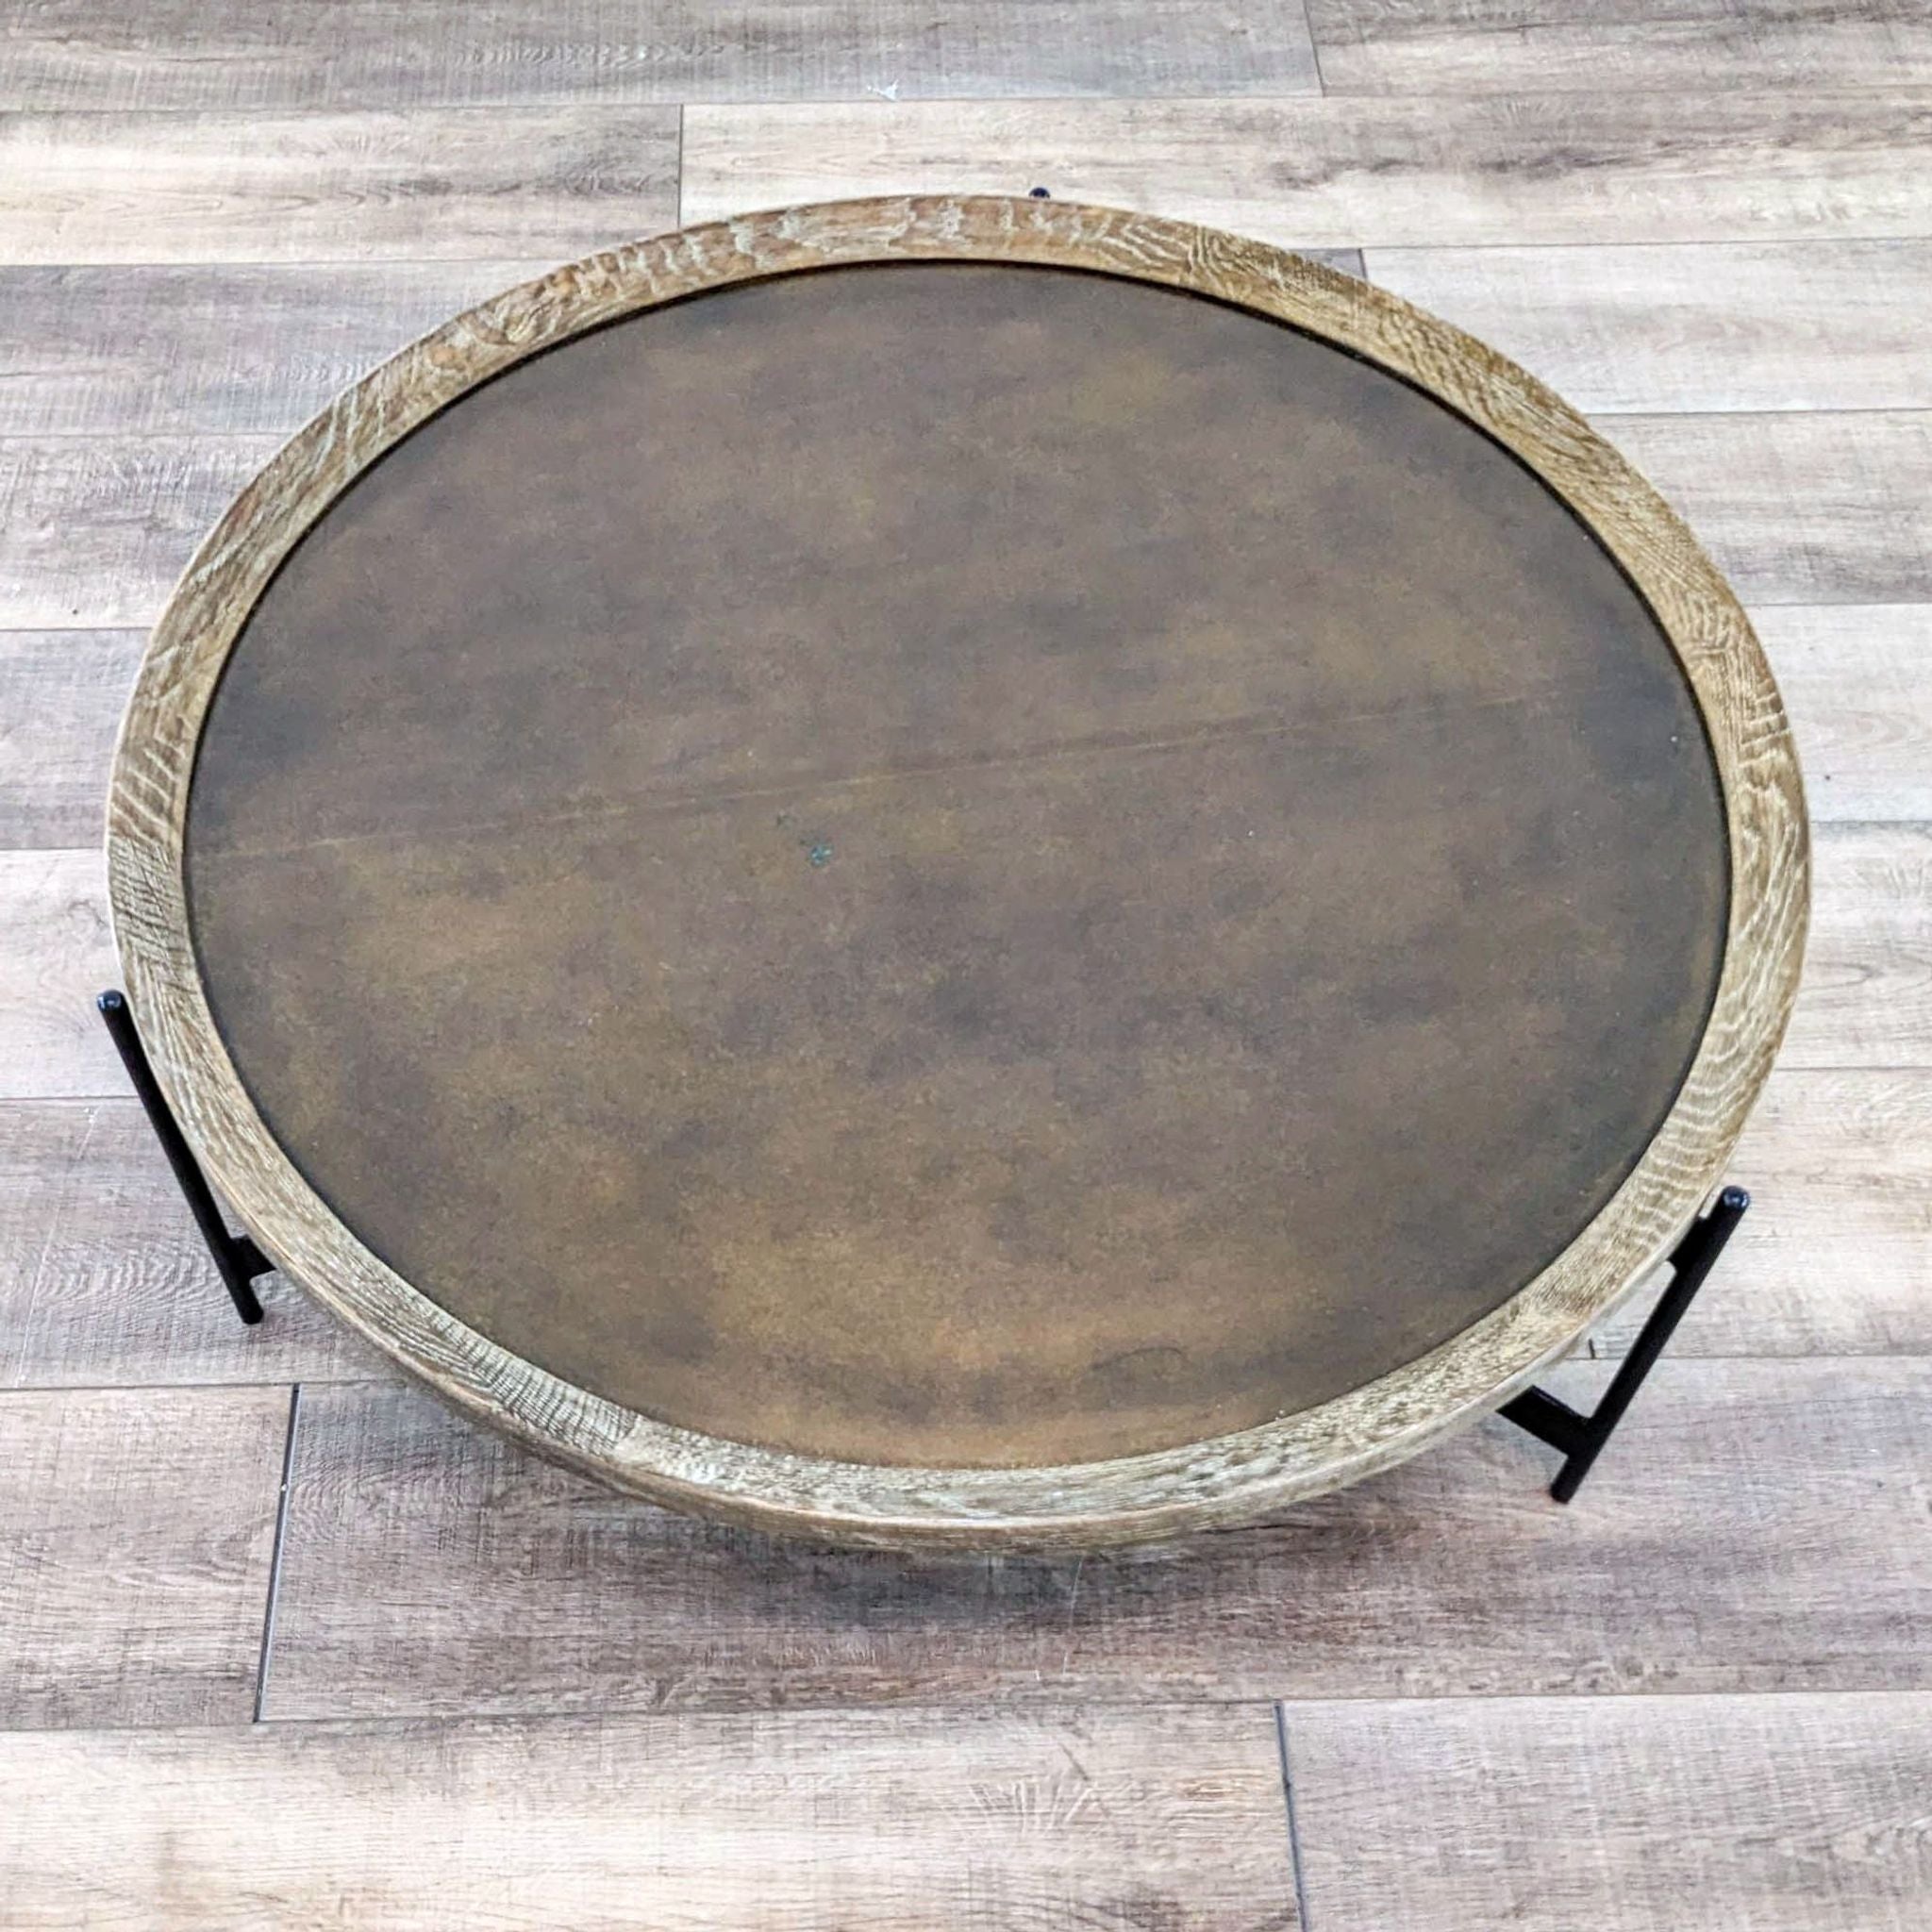 Top-down view of a round wooden Pottery Barn coffee table with a rustic finish, contrasting with the wooden floor beneath.